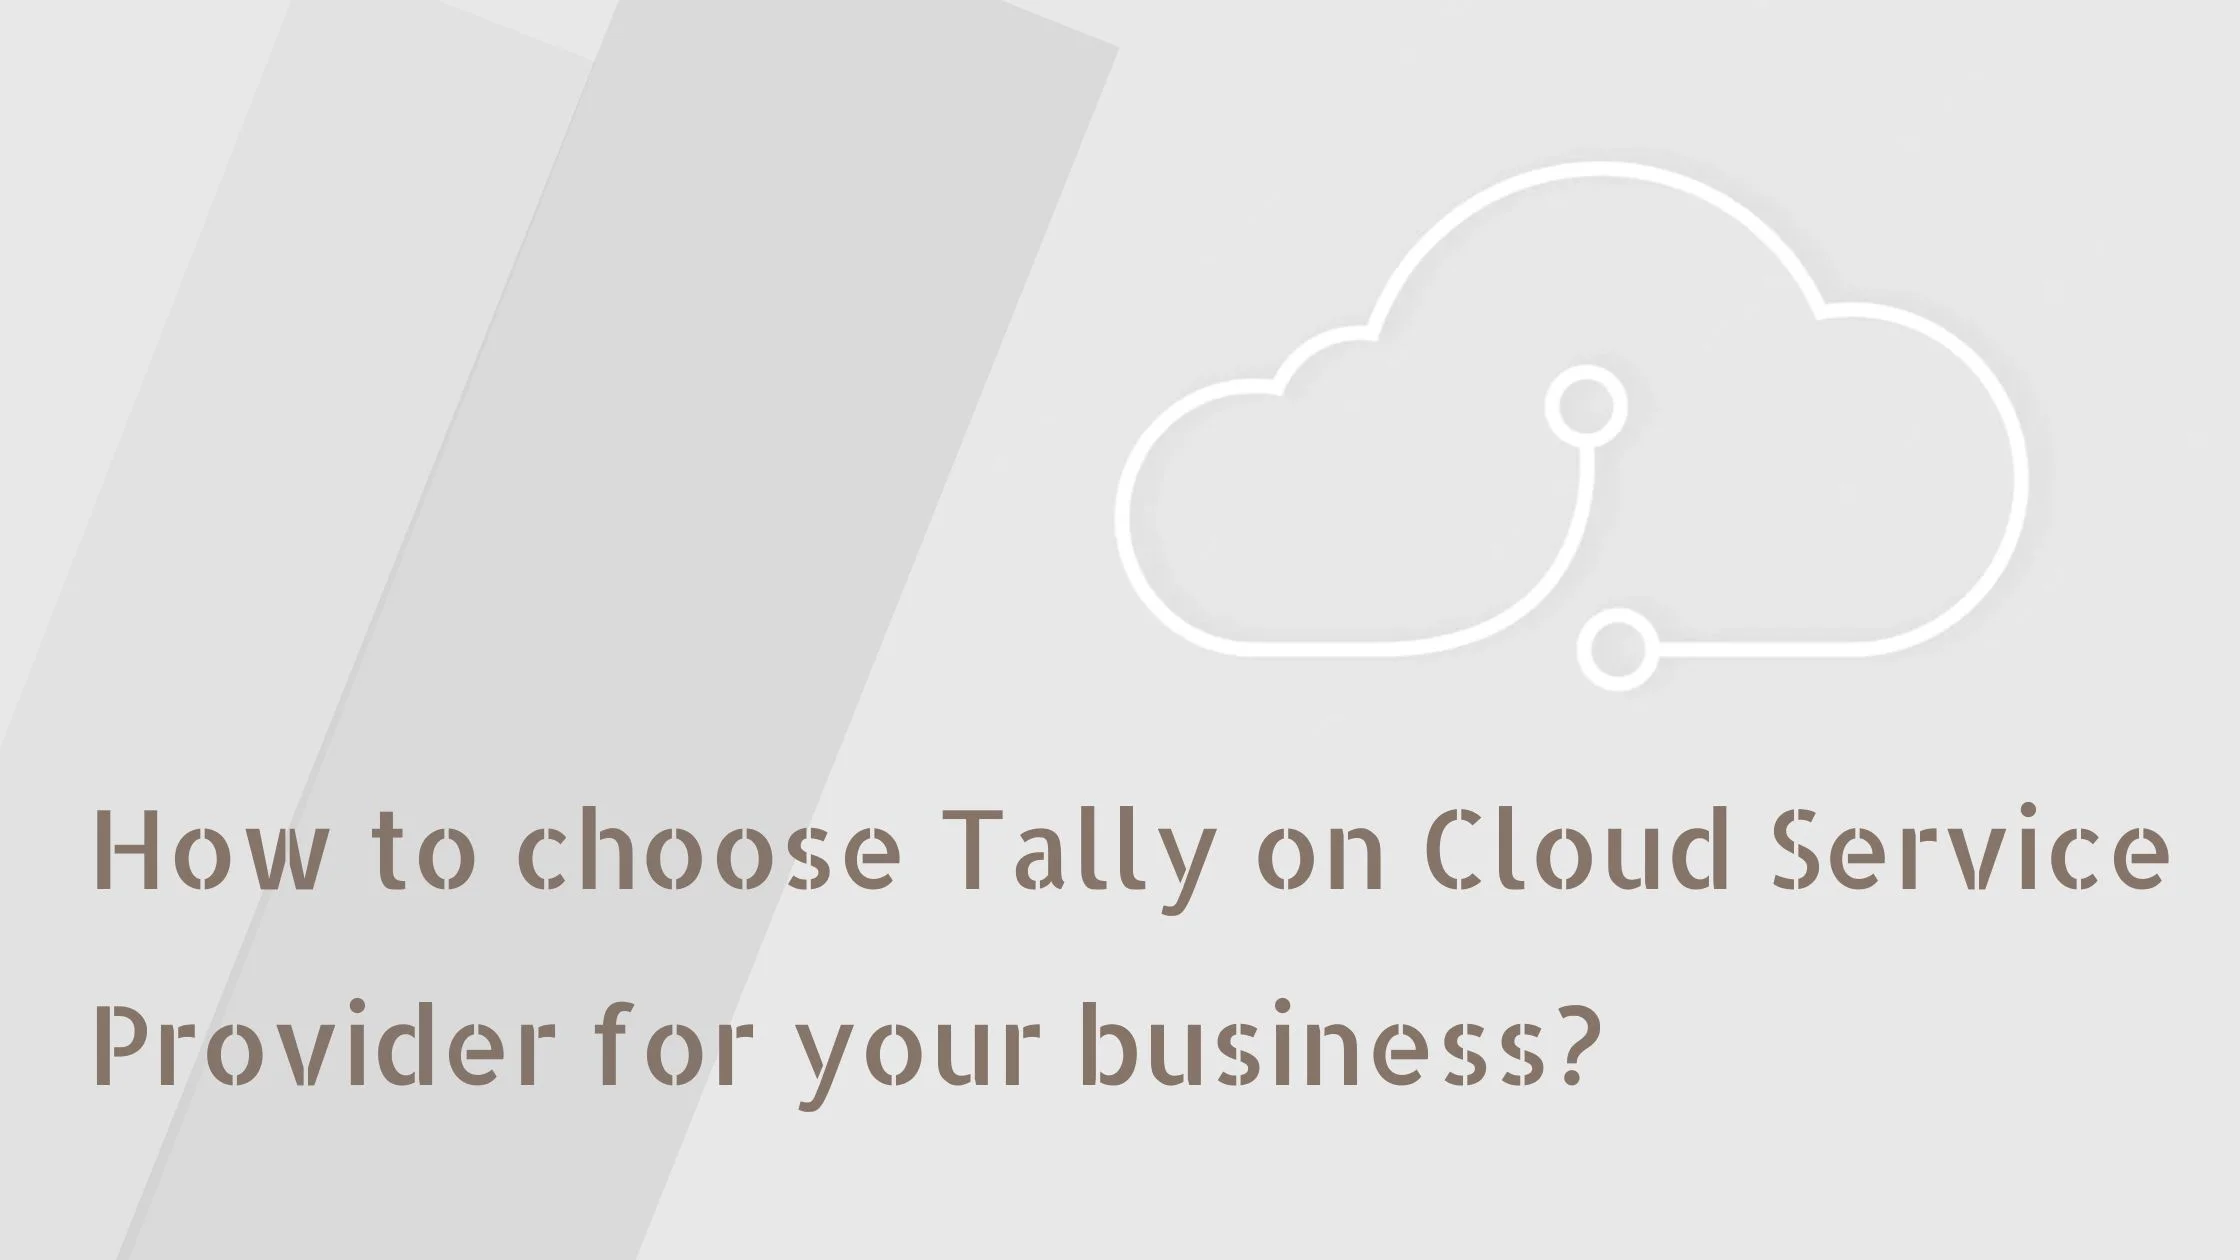 Choose Tally on cloud service provider